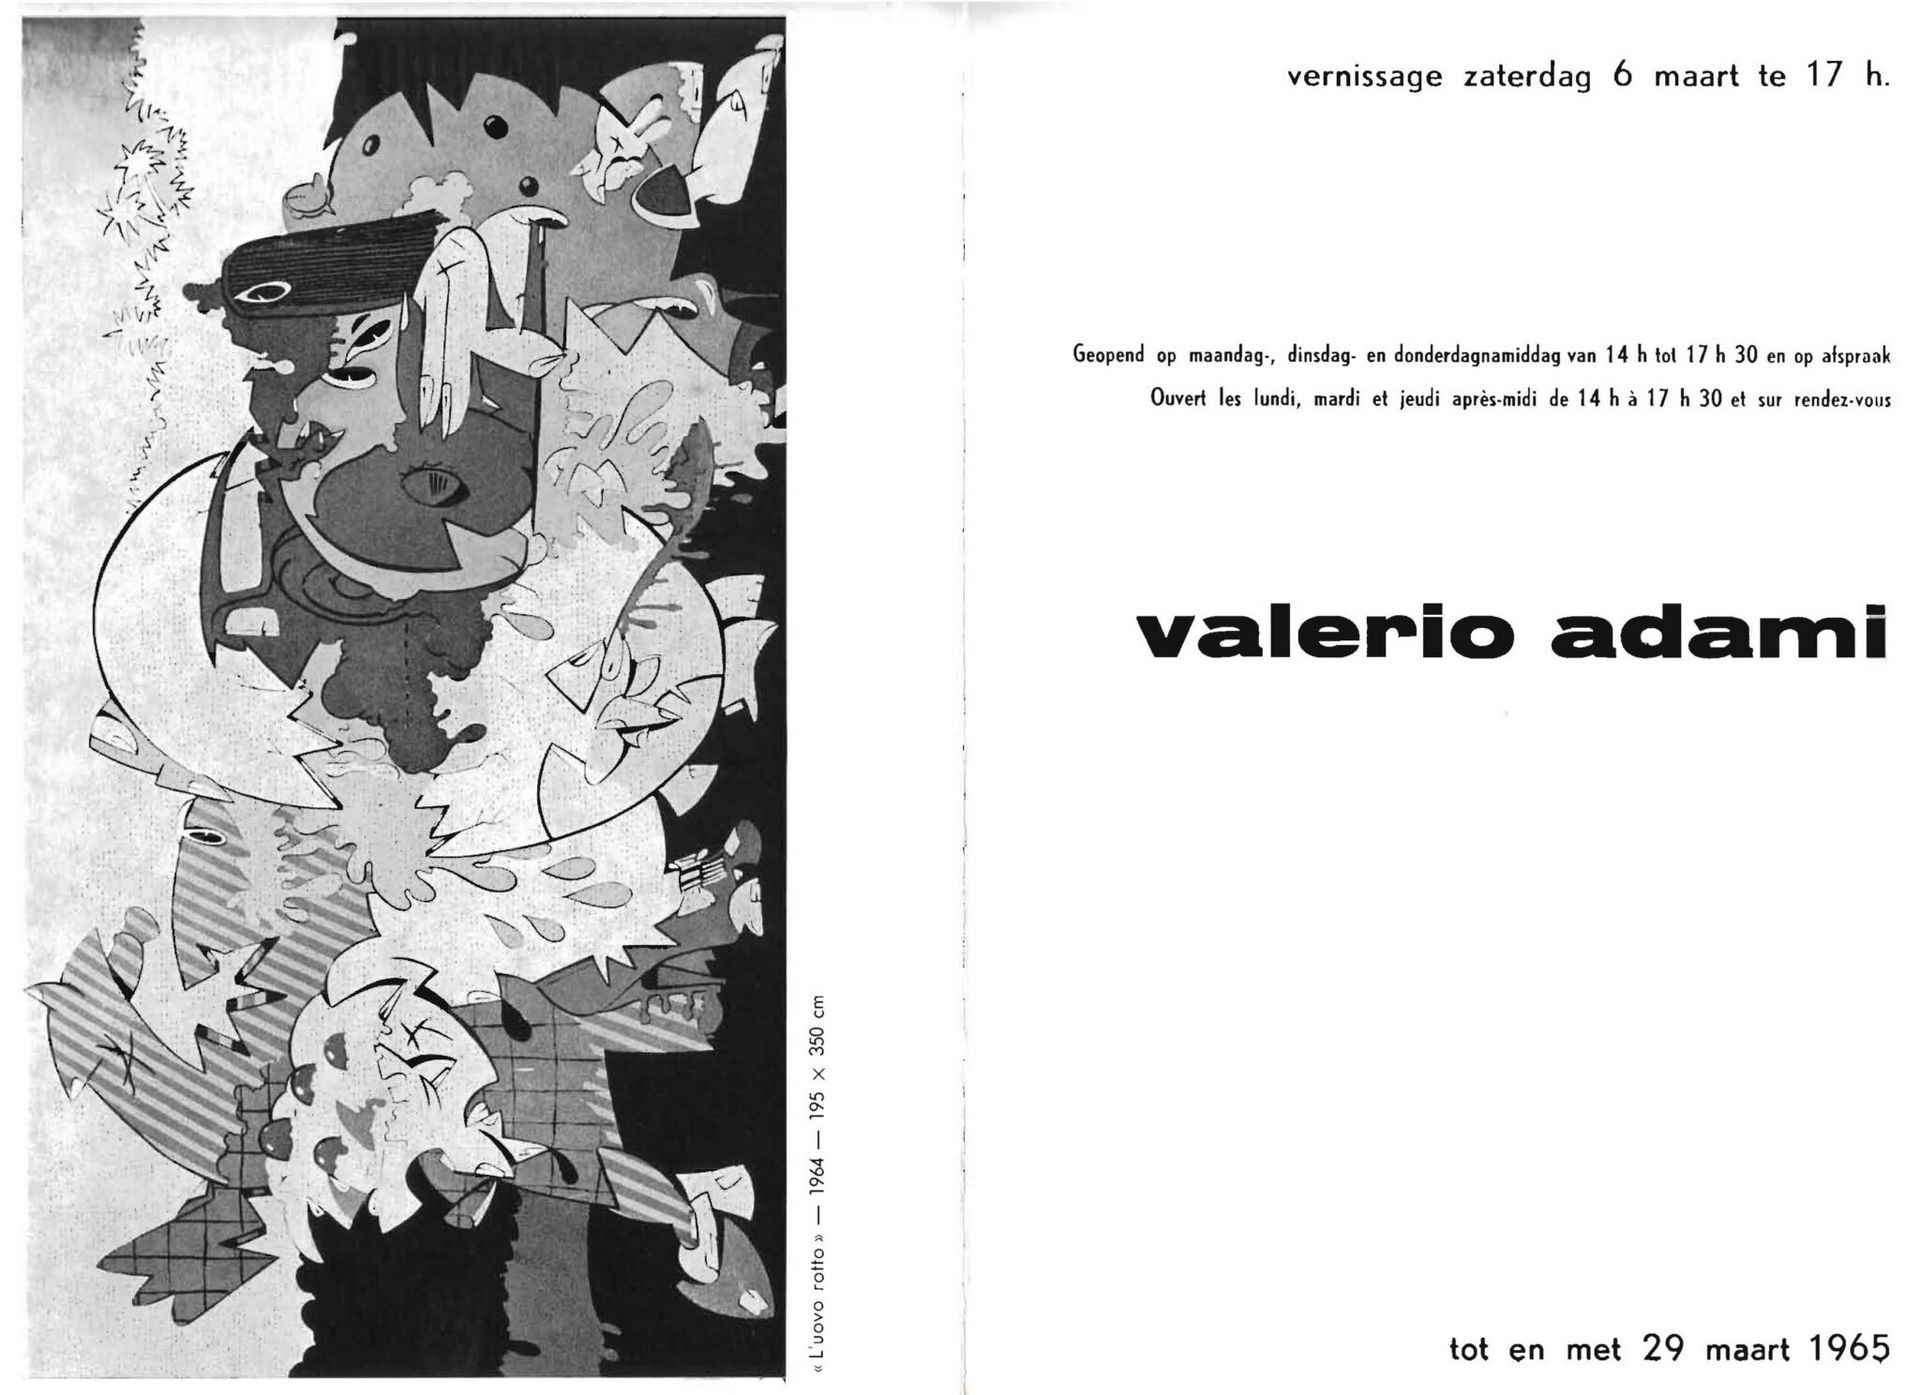 Invitation for the vernissage of Adami 29 march 1965 - Gallery Ad Libitum